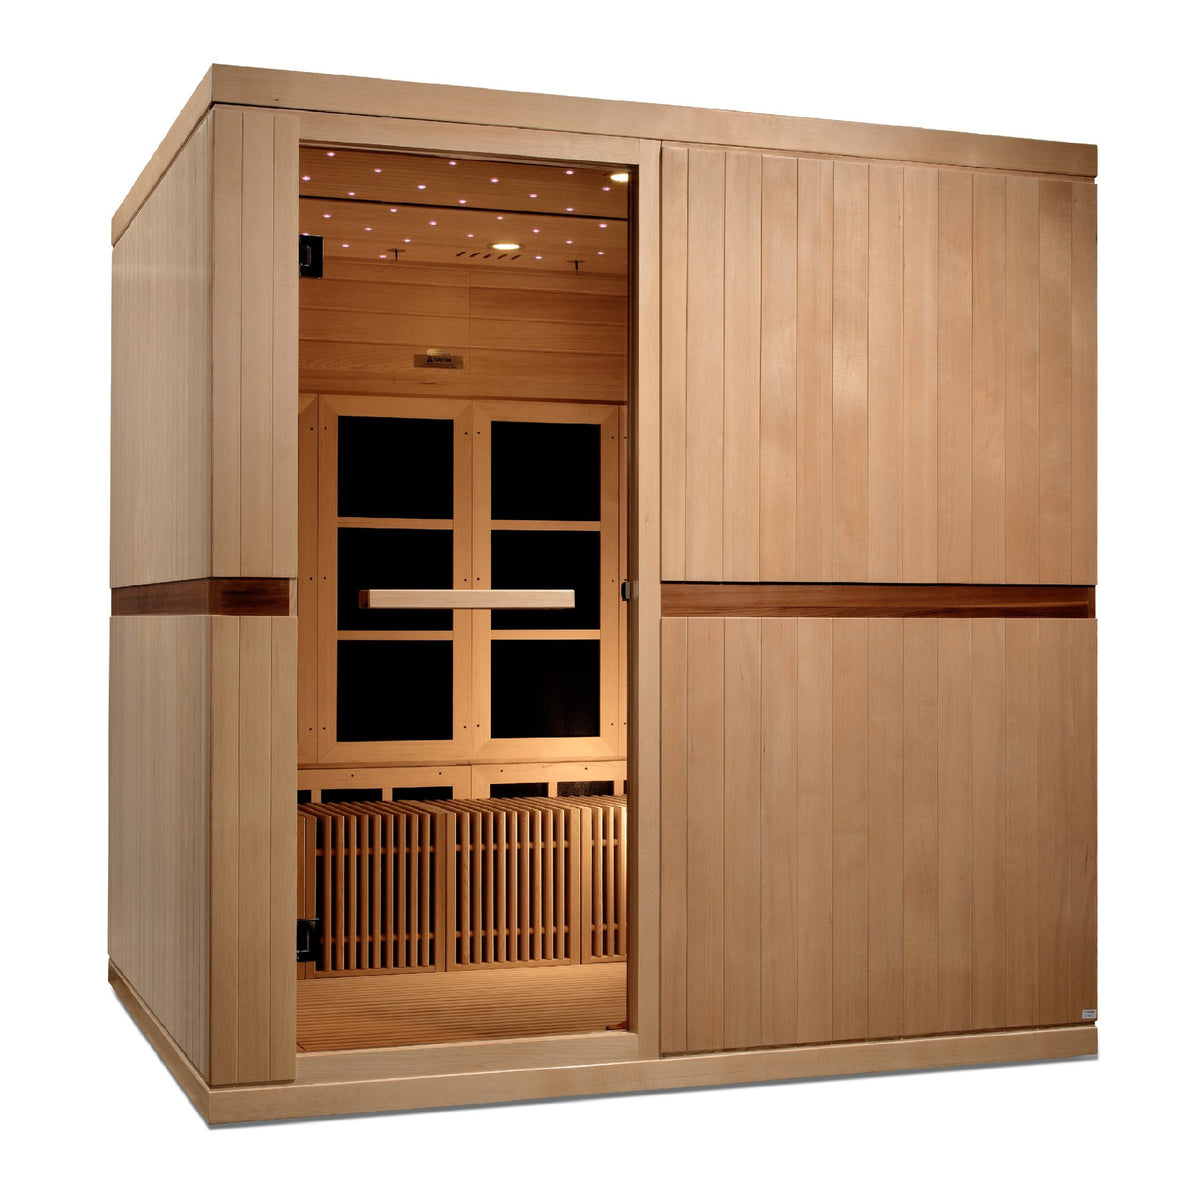 Catalonia 6 Person or 8 Person Ultra Low EMF Infrared Sauna (Wheelchair Accessible) - Ships in 1-3 Business Days / "cs101" for $101 Discount